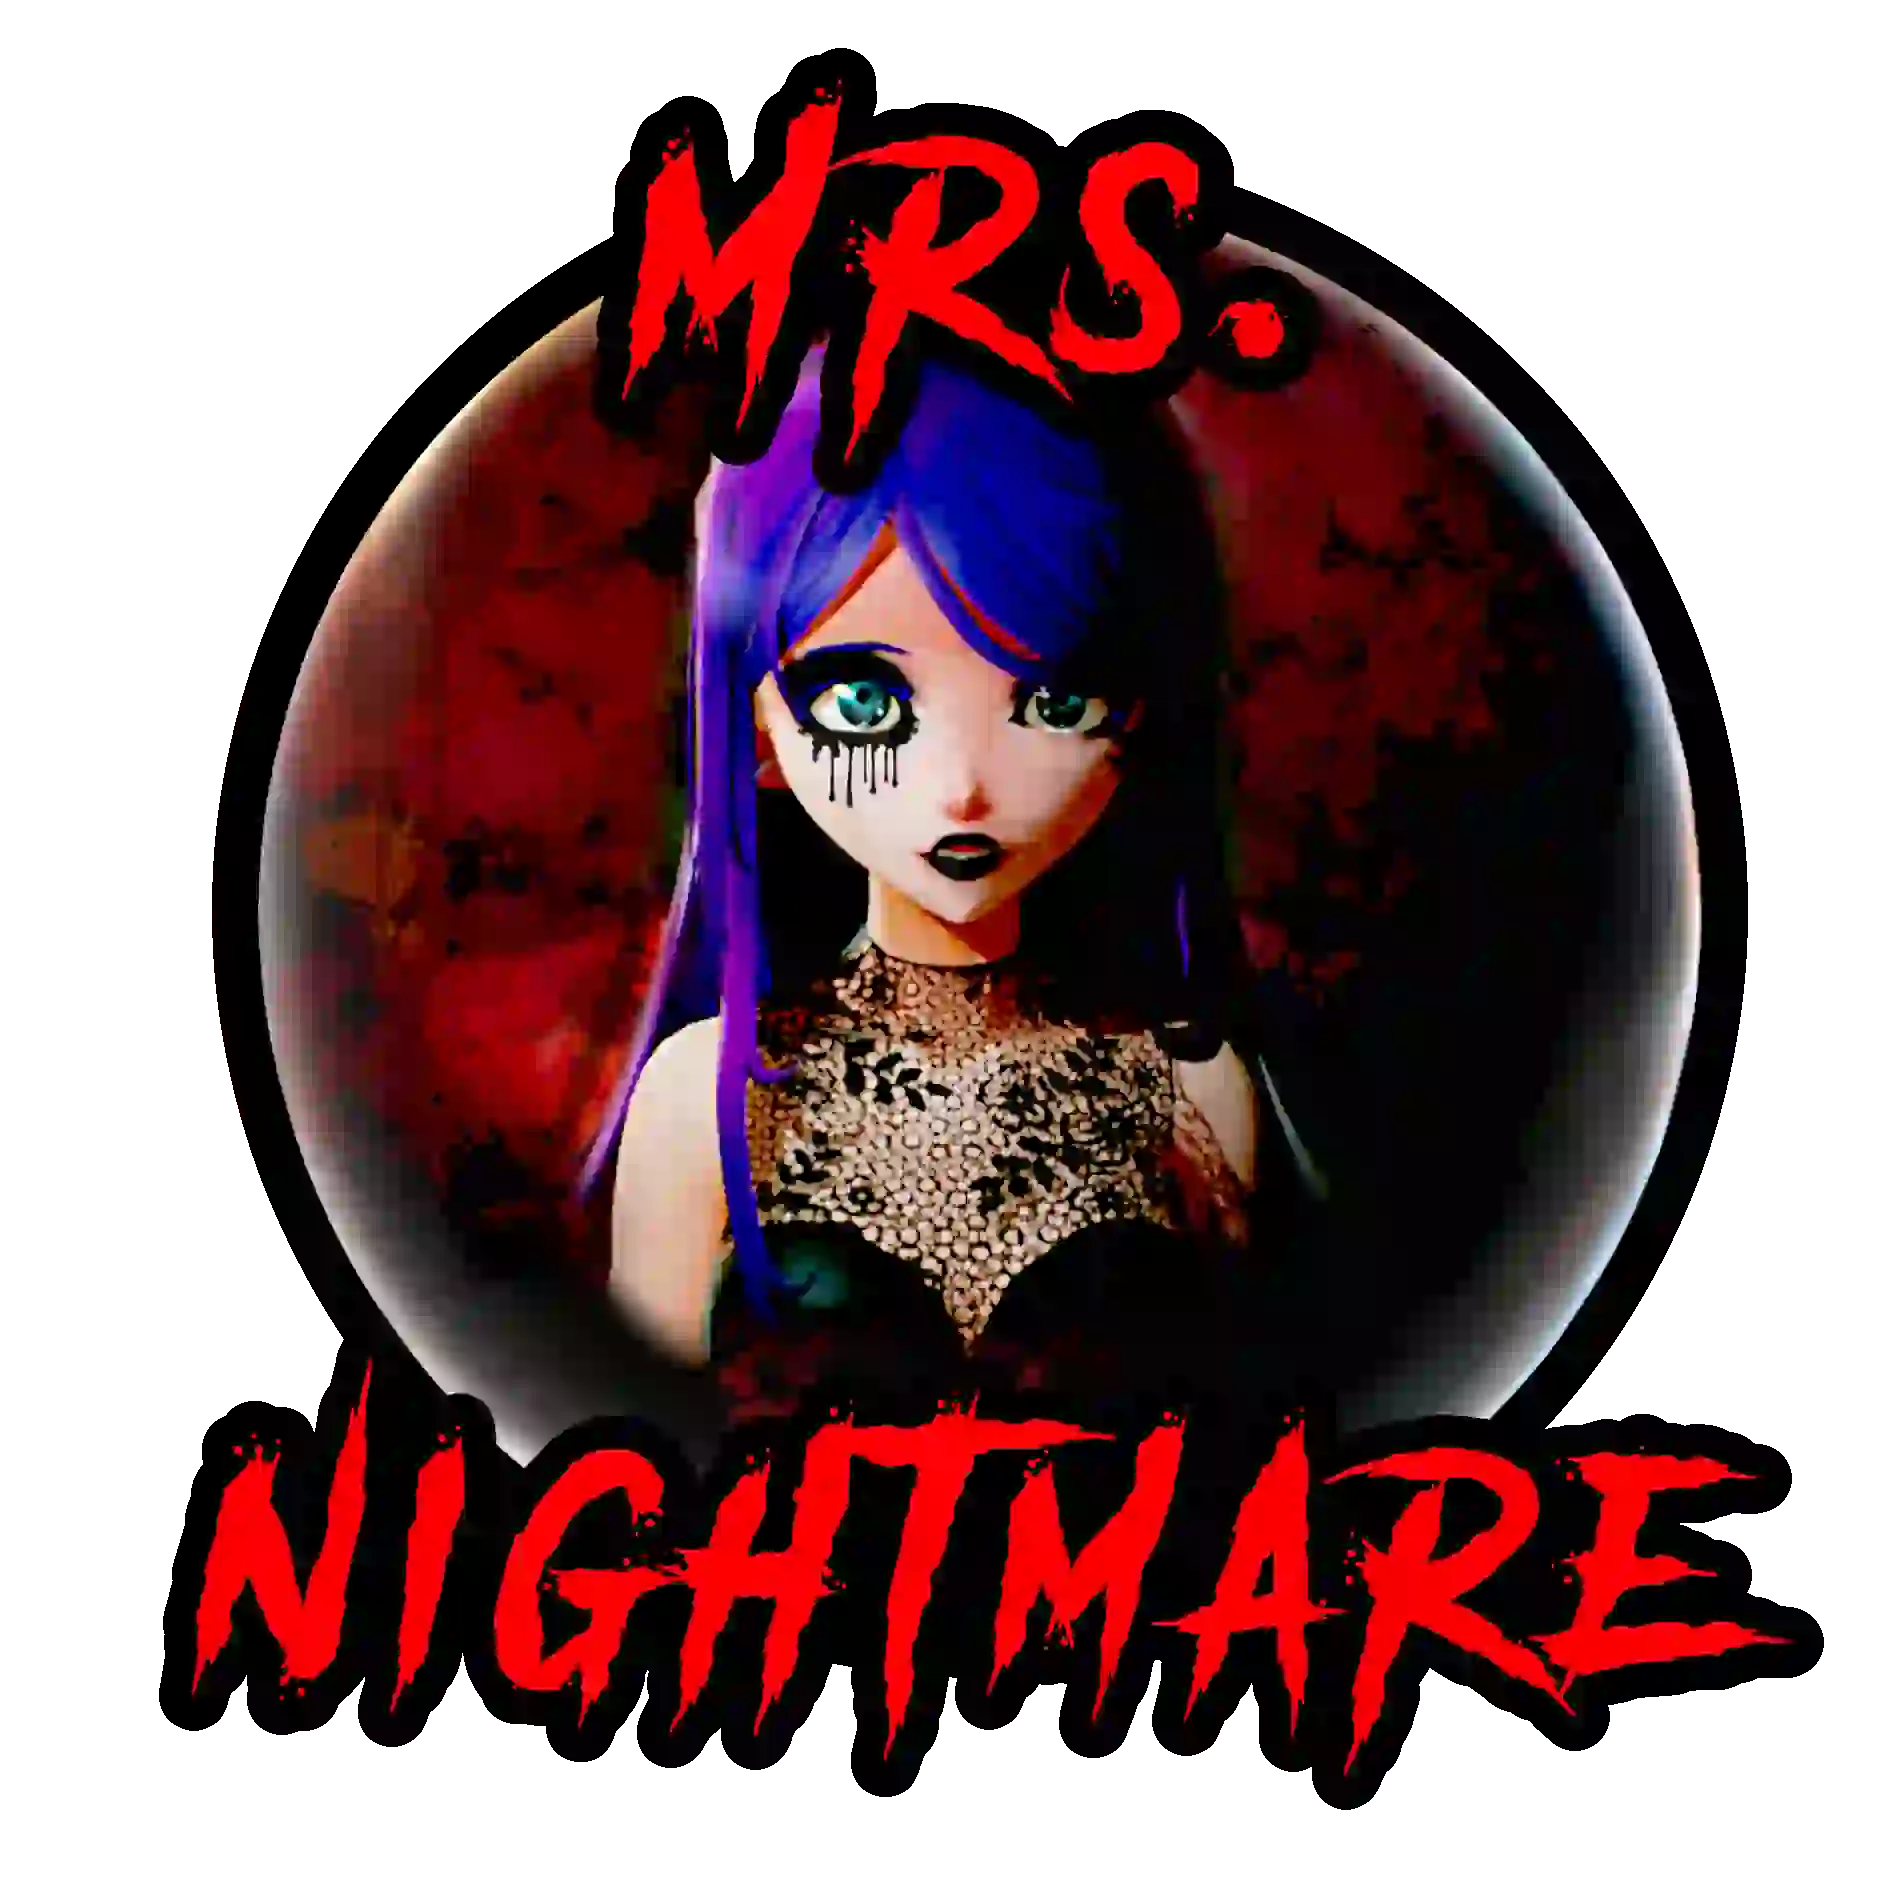 Experience a world of horror and suspense with Mrs. Nightmare's Creepypasta Narrations. Join her for a spine-chilling journey through classic and original stories that will keep you up all night!